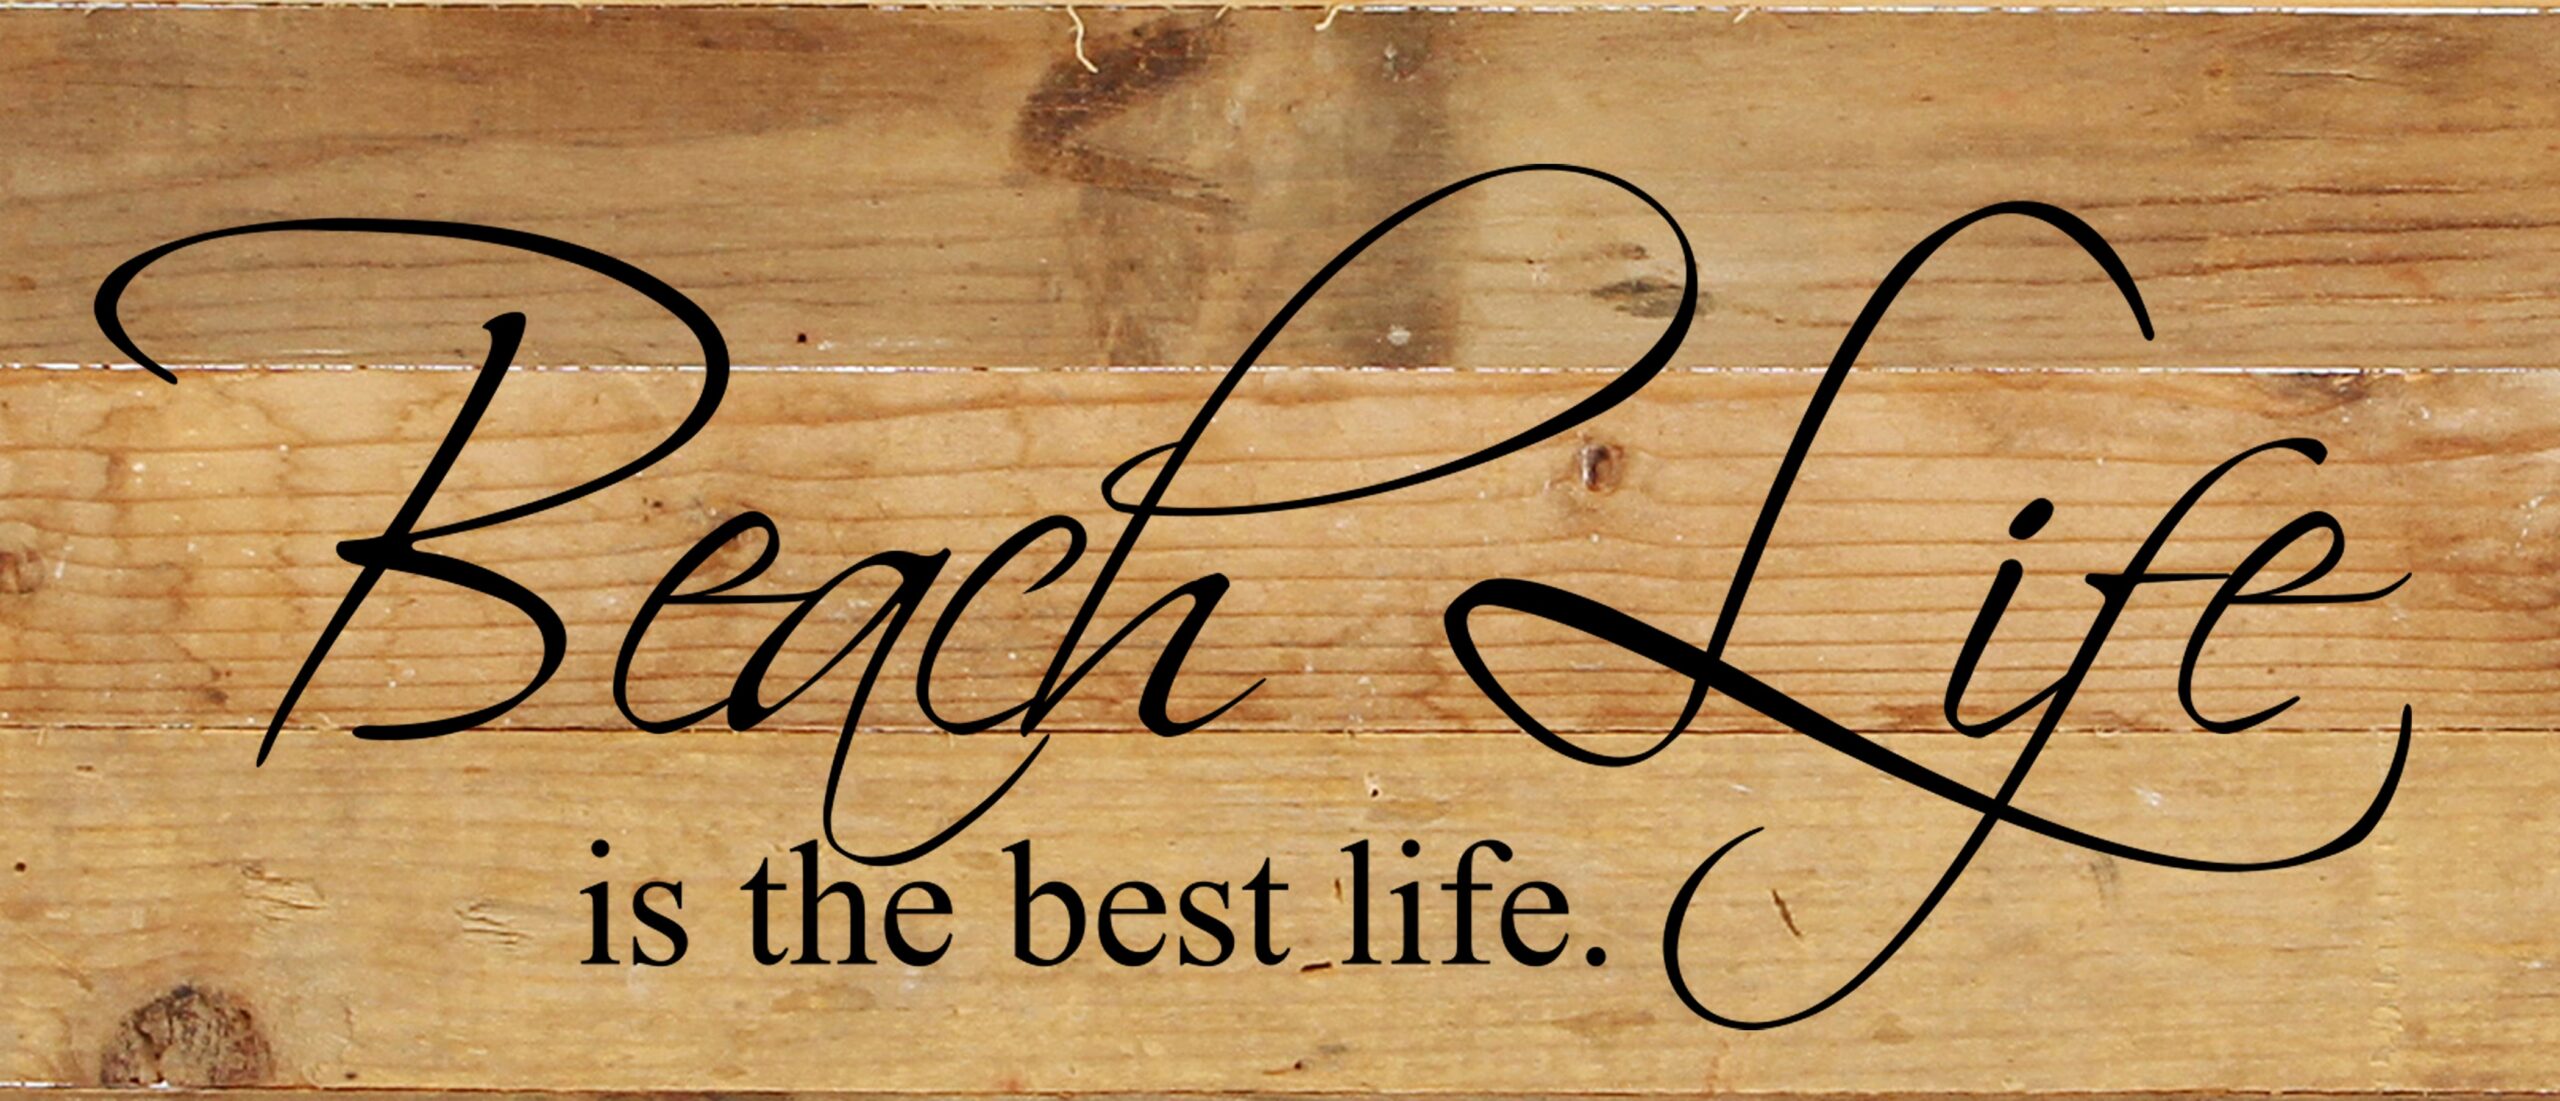 Beach life is the best life. / 14"x6" Reclaimed Wood Sign